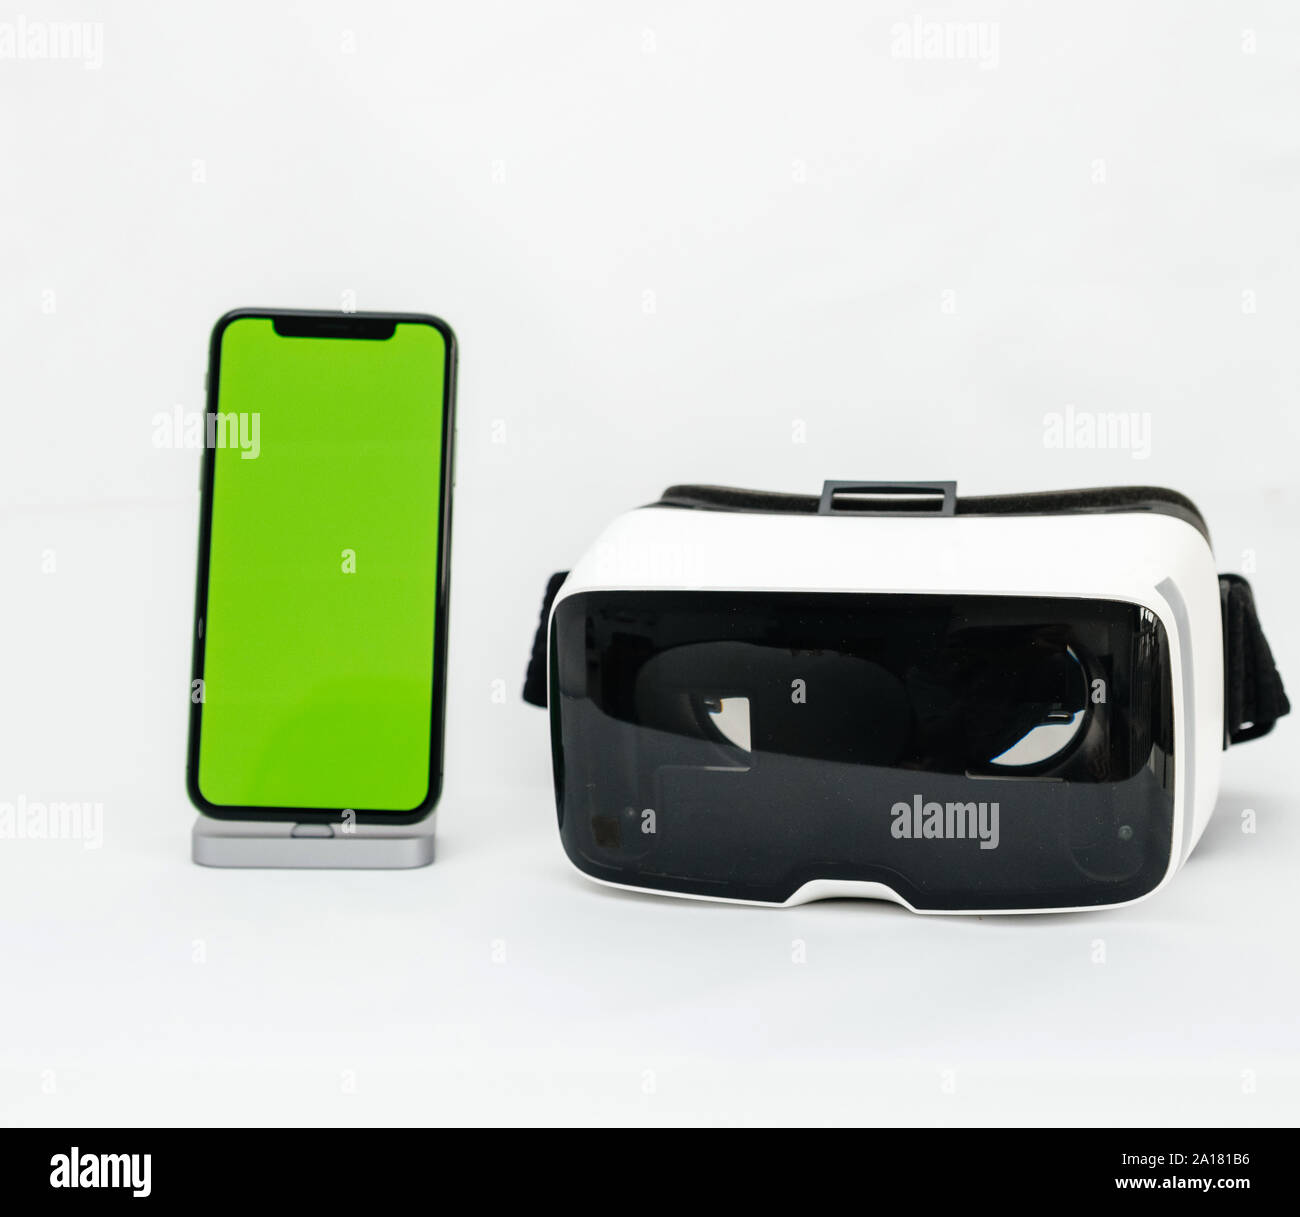 Paris, France - Sep 12, 2019: latest iPhone 11 Pro with green key screen on  display next to VR mask manufactured by Zeiss Stock Photo - Alamy